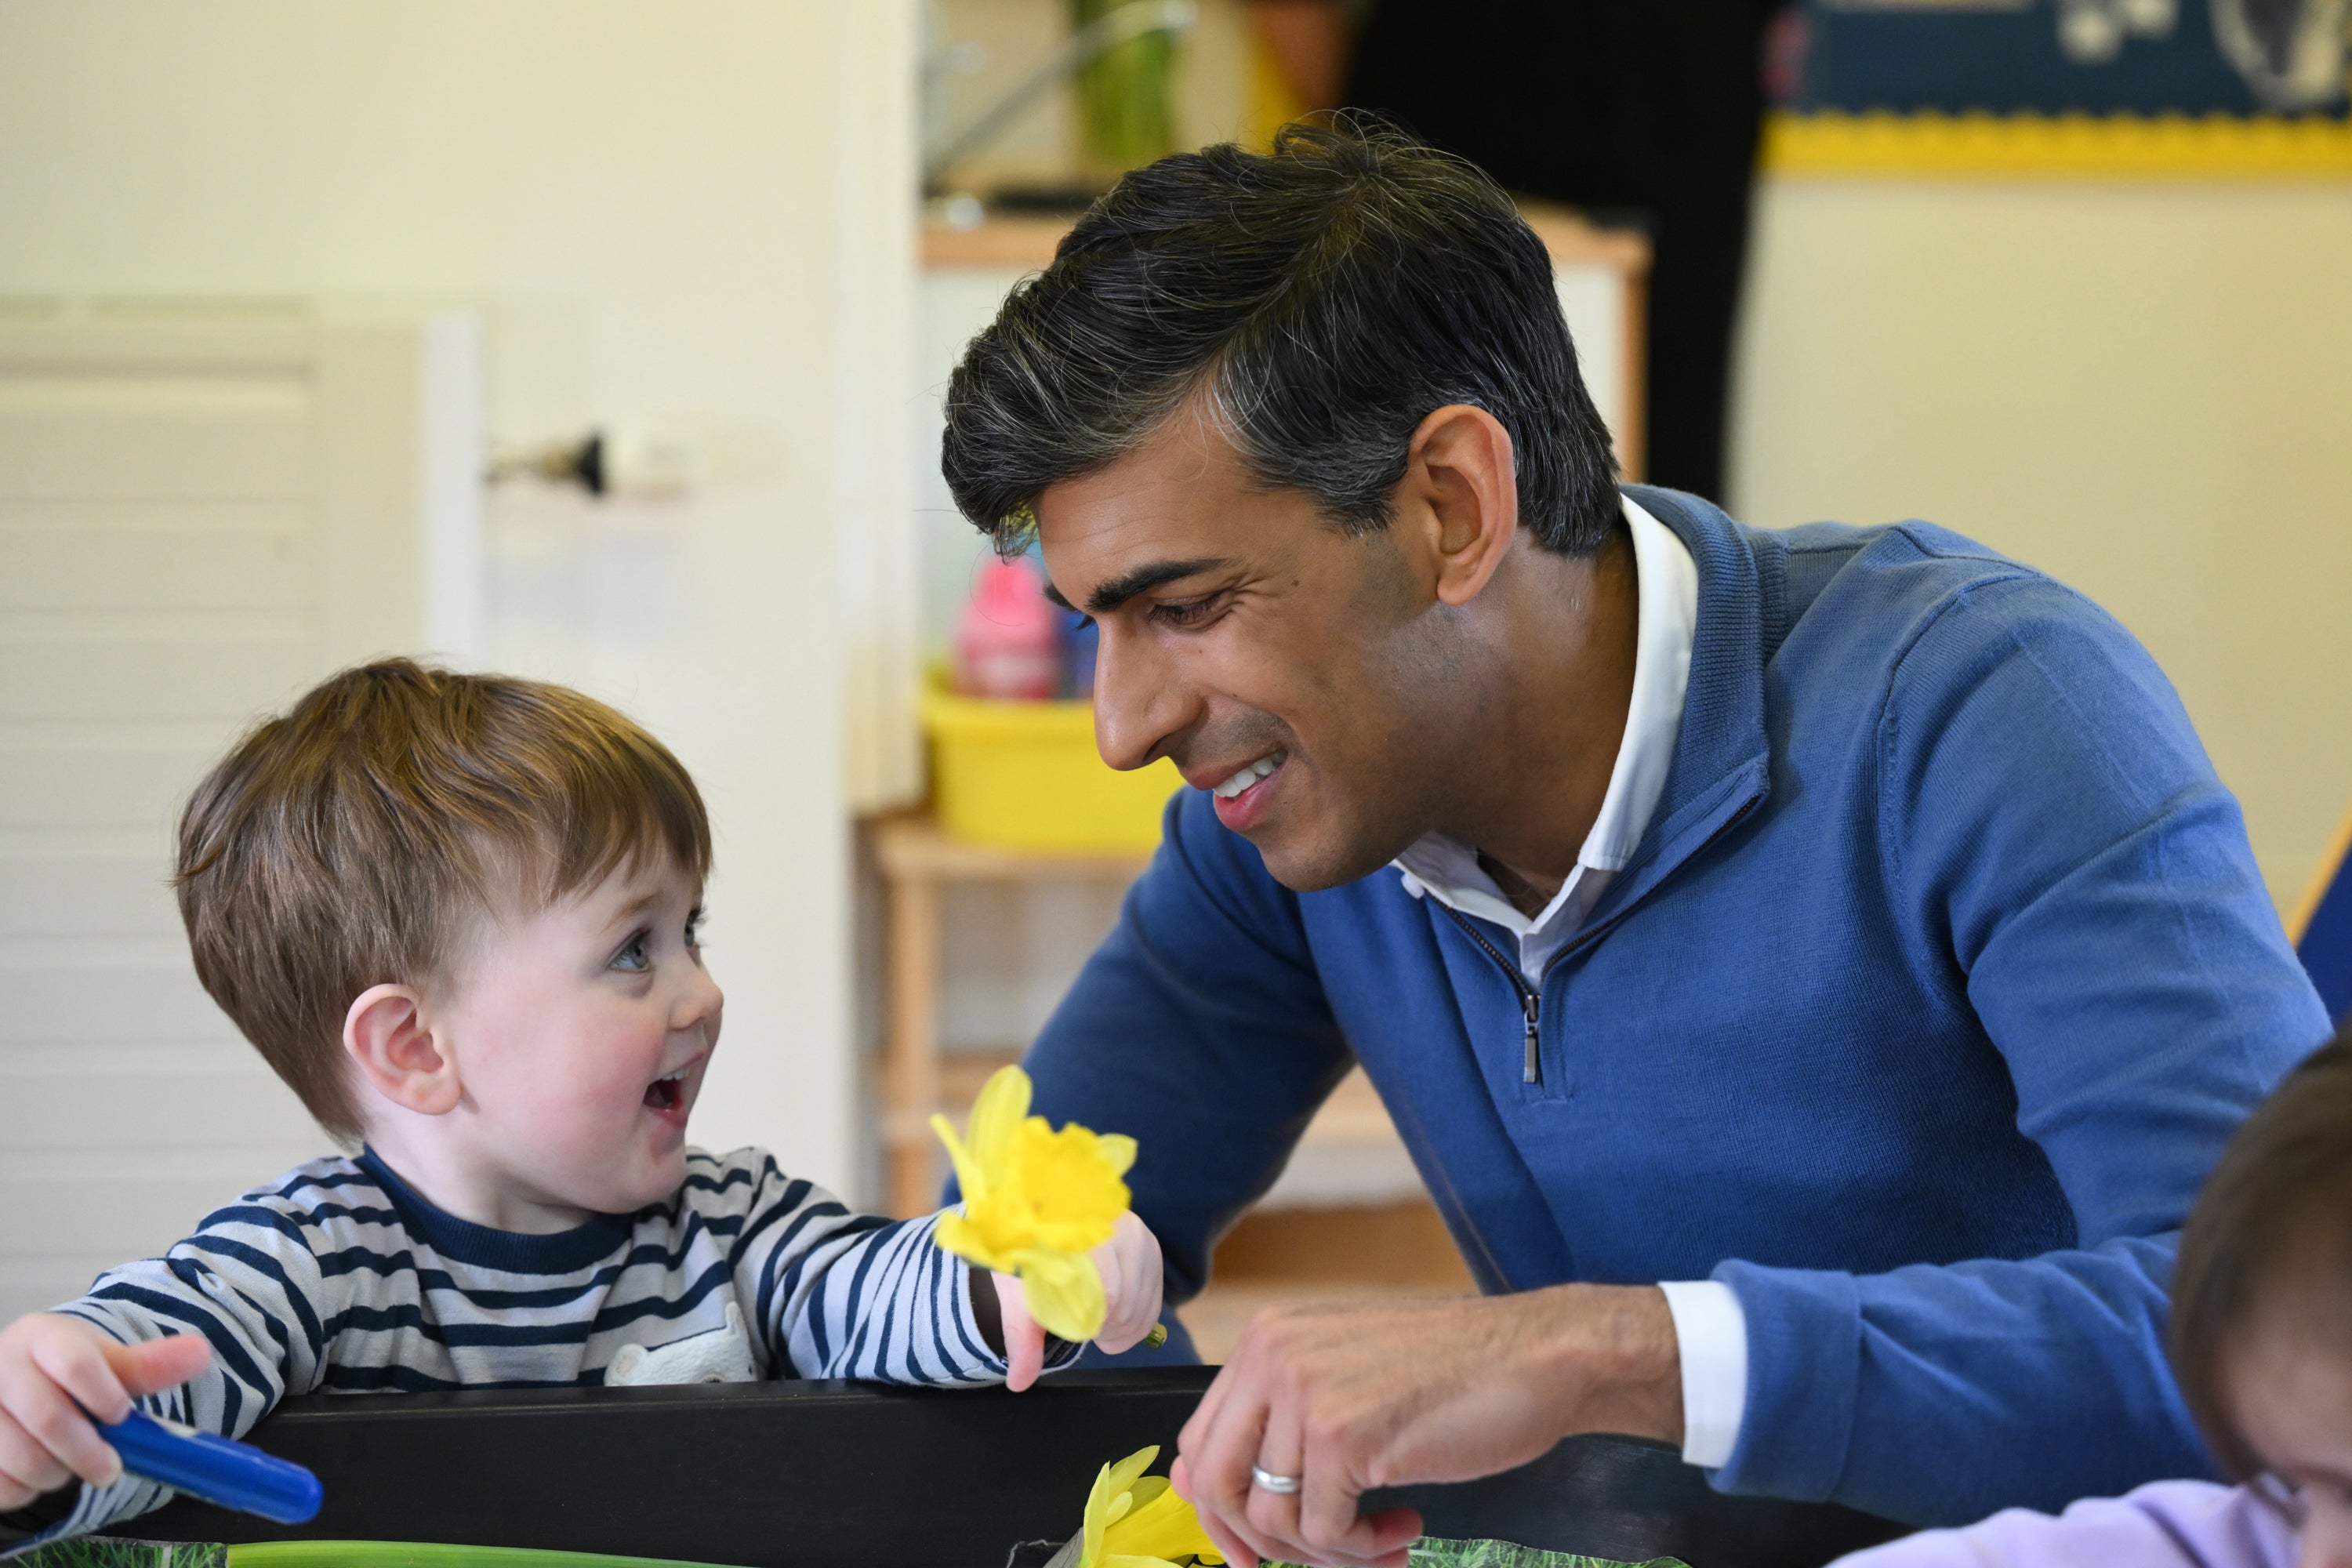 Free childcare sounds good on paper – and during an election campaign – but the reality is very different